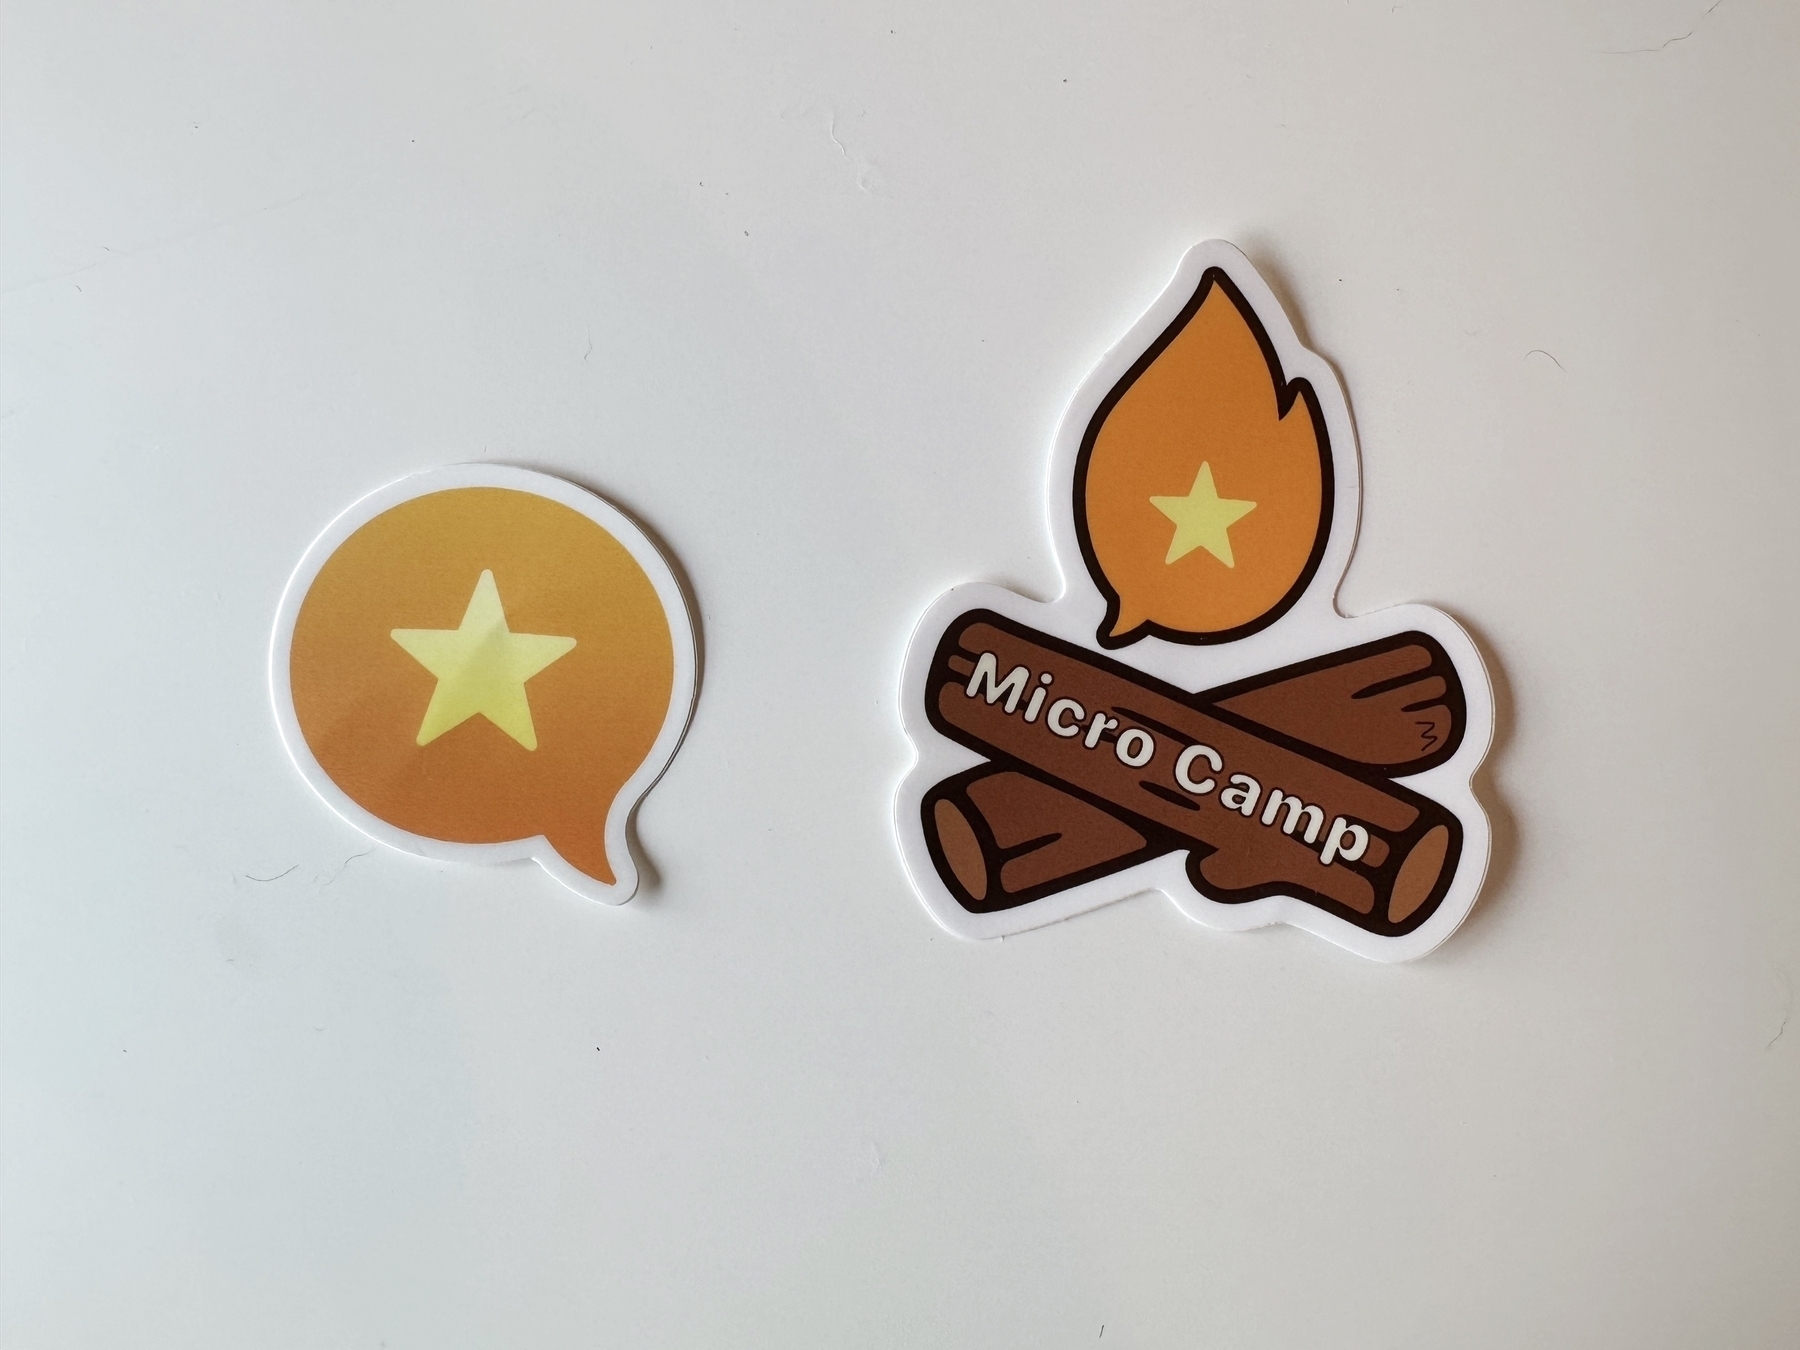 Micro.blog and Micro Camp Stickers